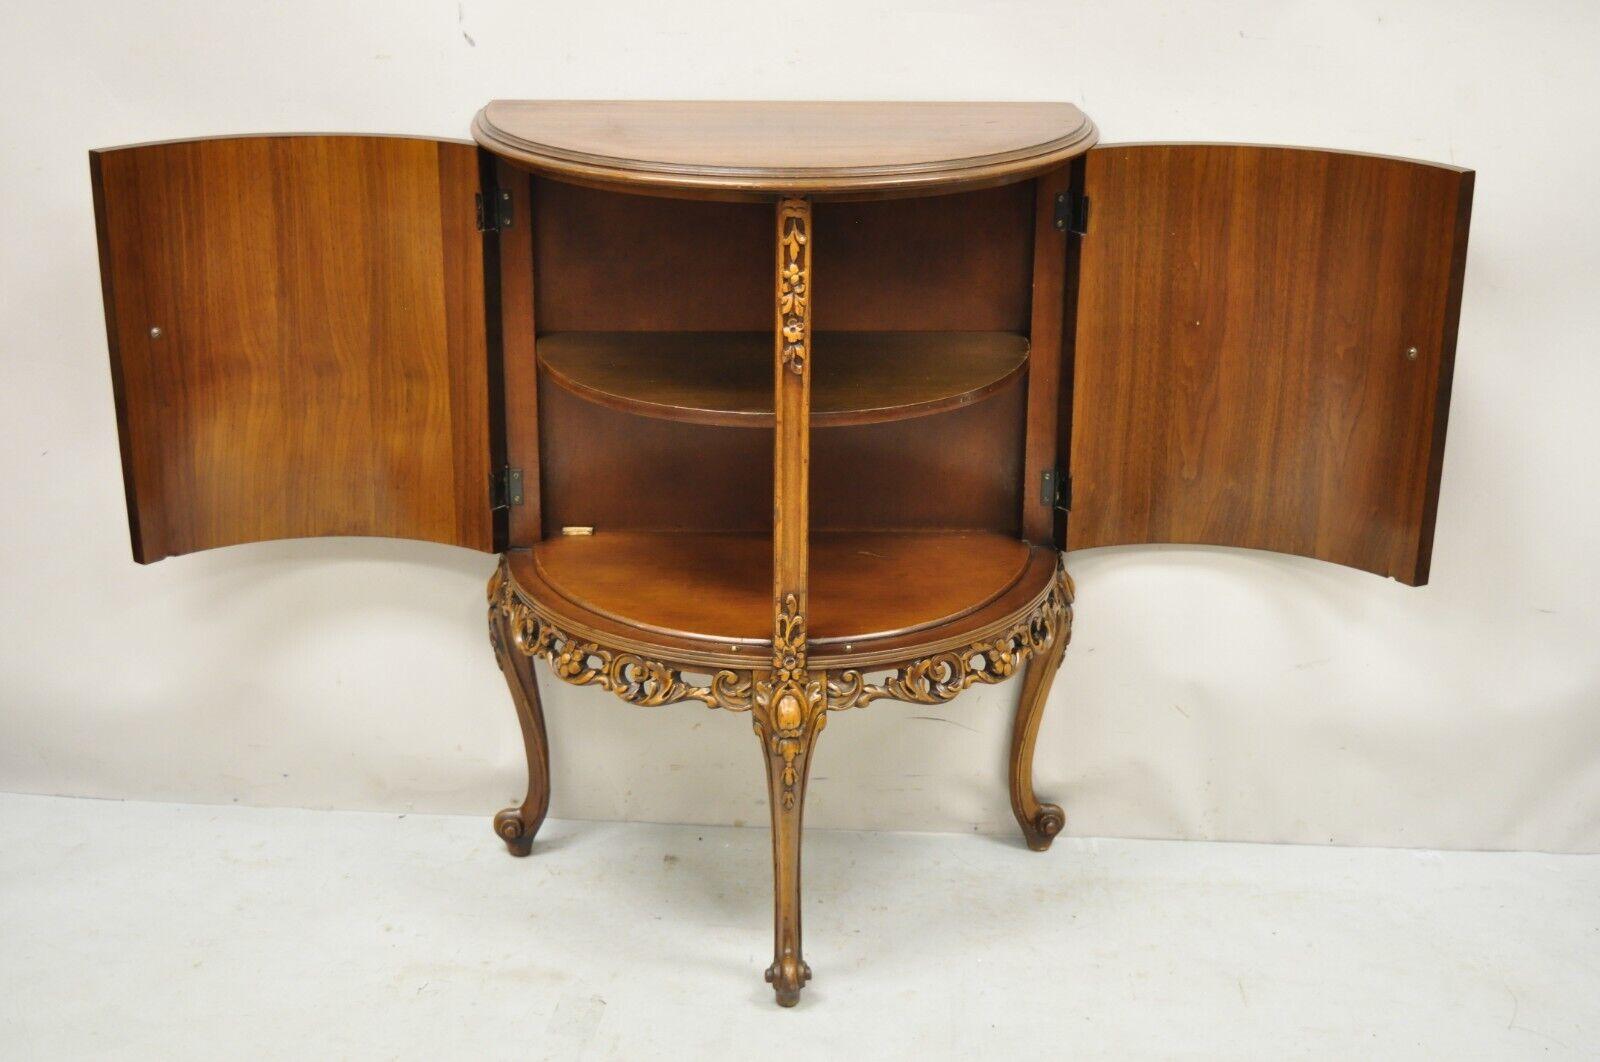 Vintage French Louis XV Style Half Round Demilune 2 Door Cabinet Side Table In Good Condition For Sale In Philadelphia, PA